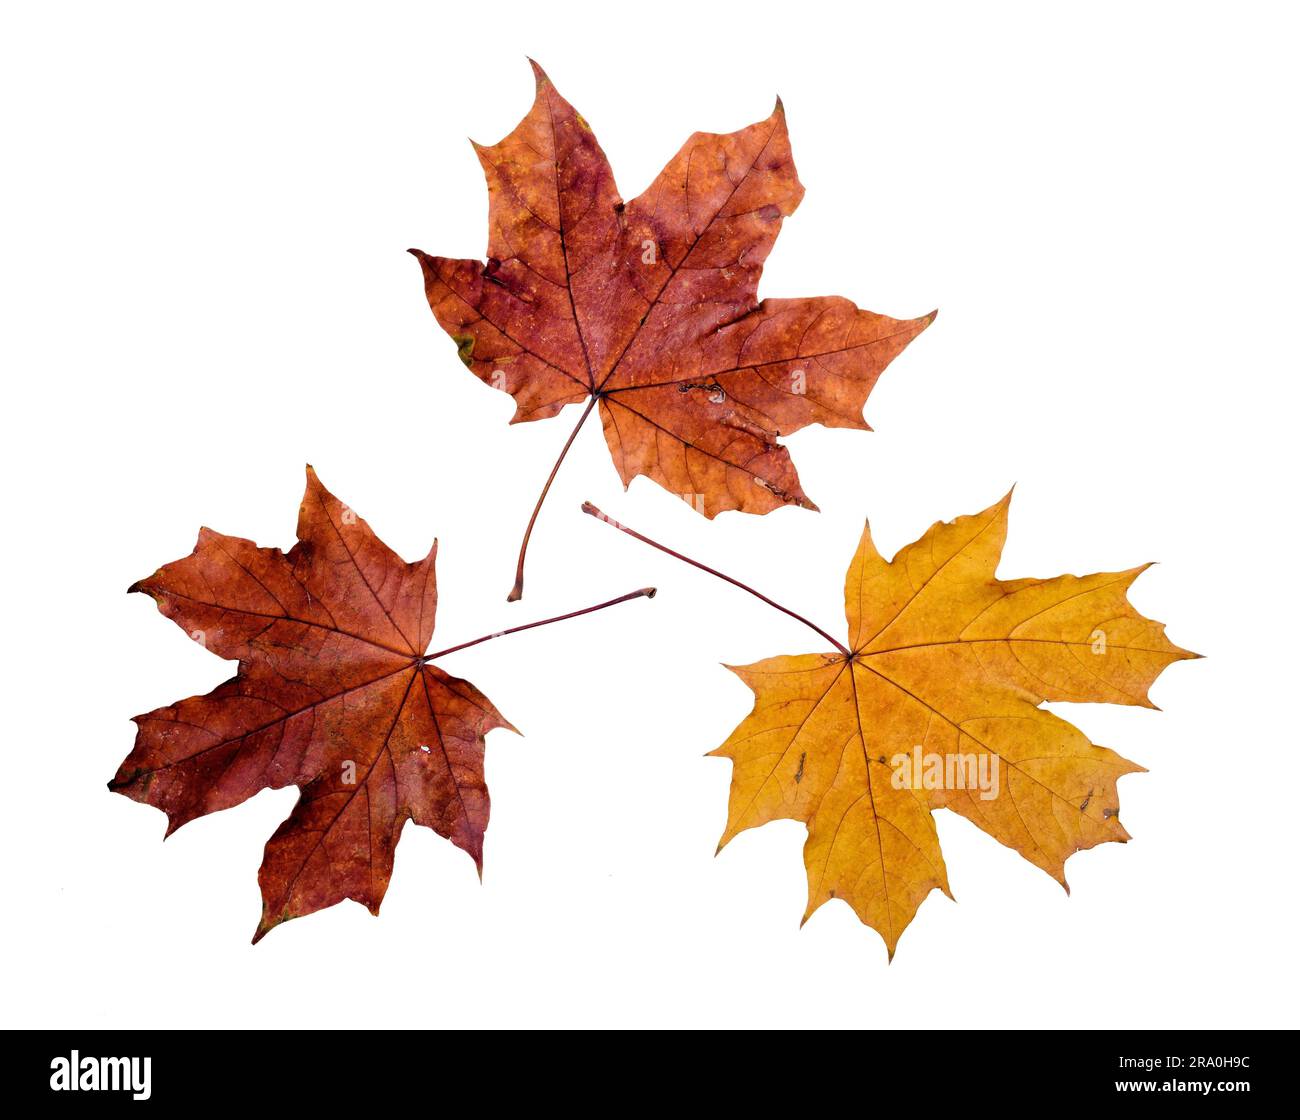 Maple Tree Leaves With Autumn Colors Isolated On White Background